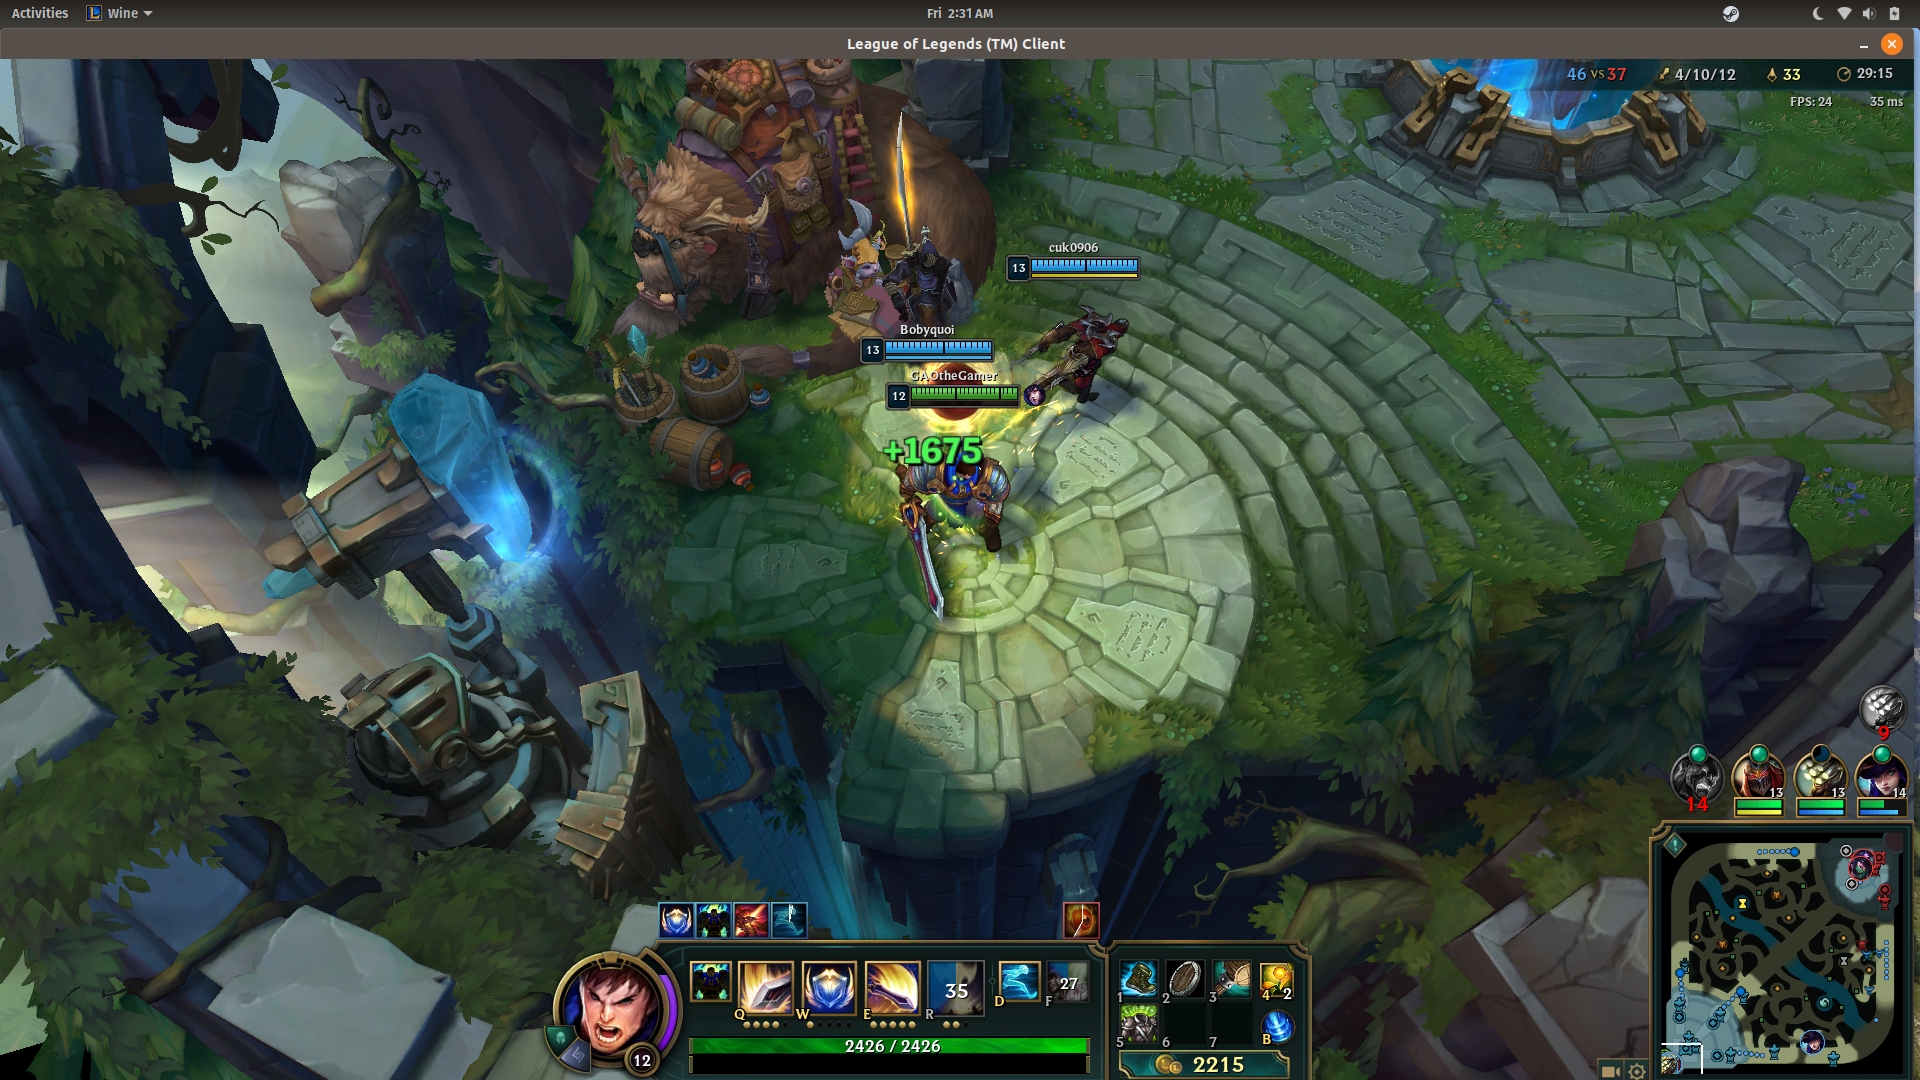 Install League of Legends on Linux Mint / Ubuntu with Wine